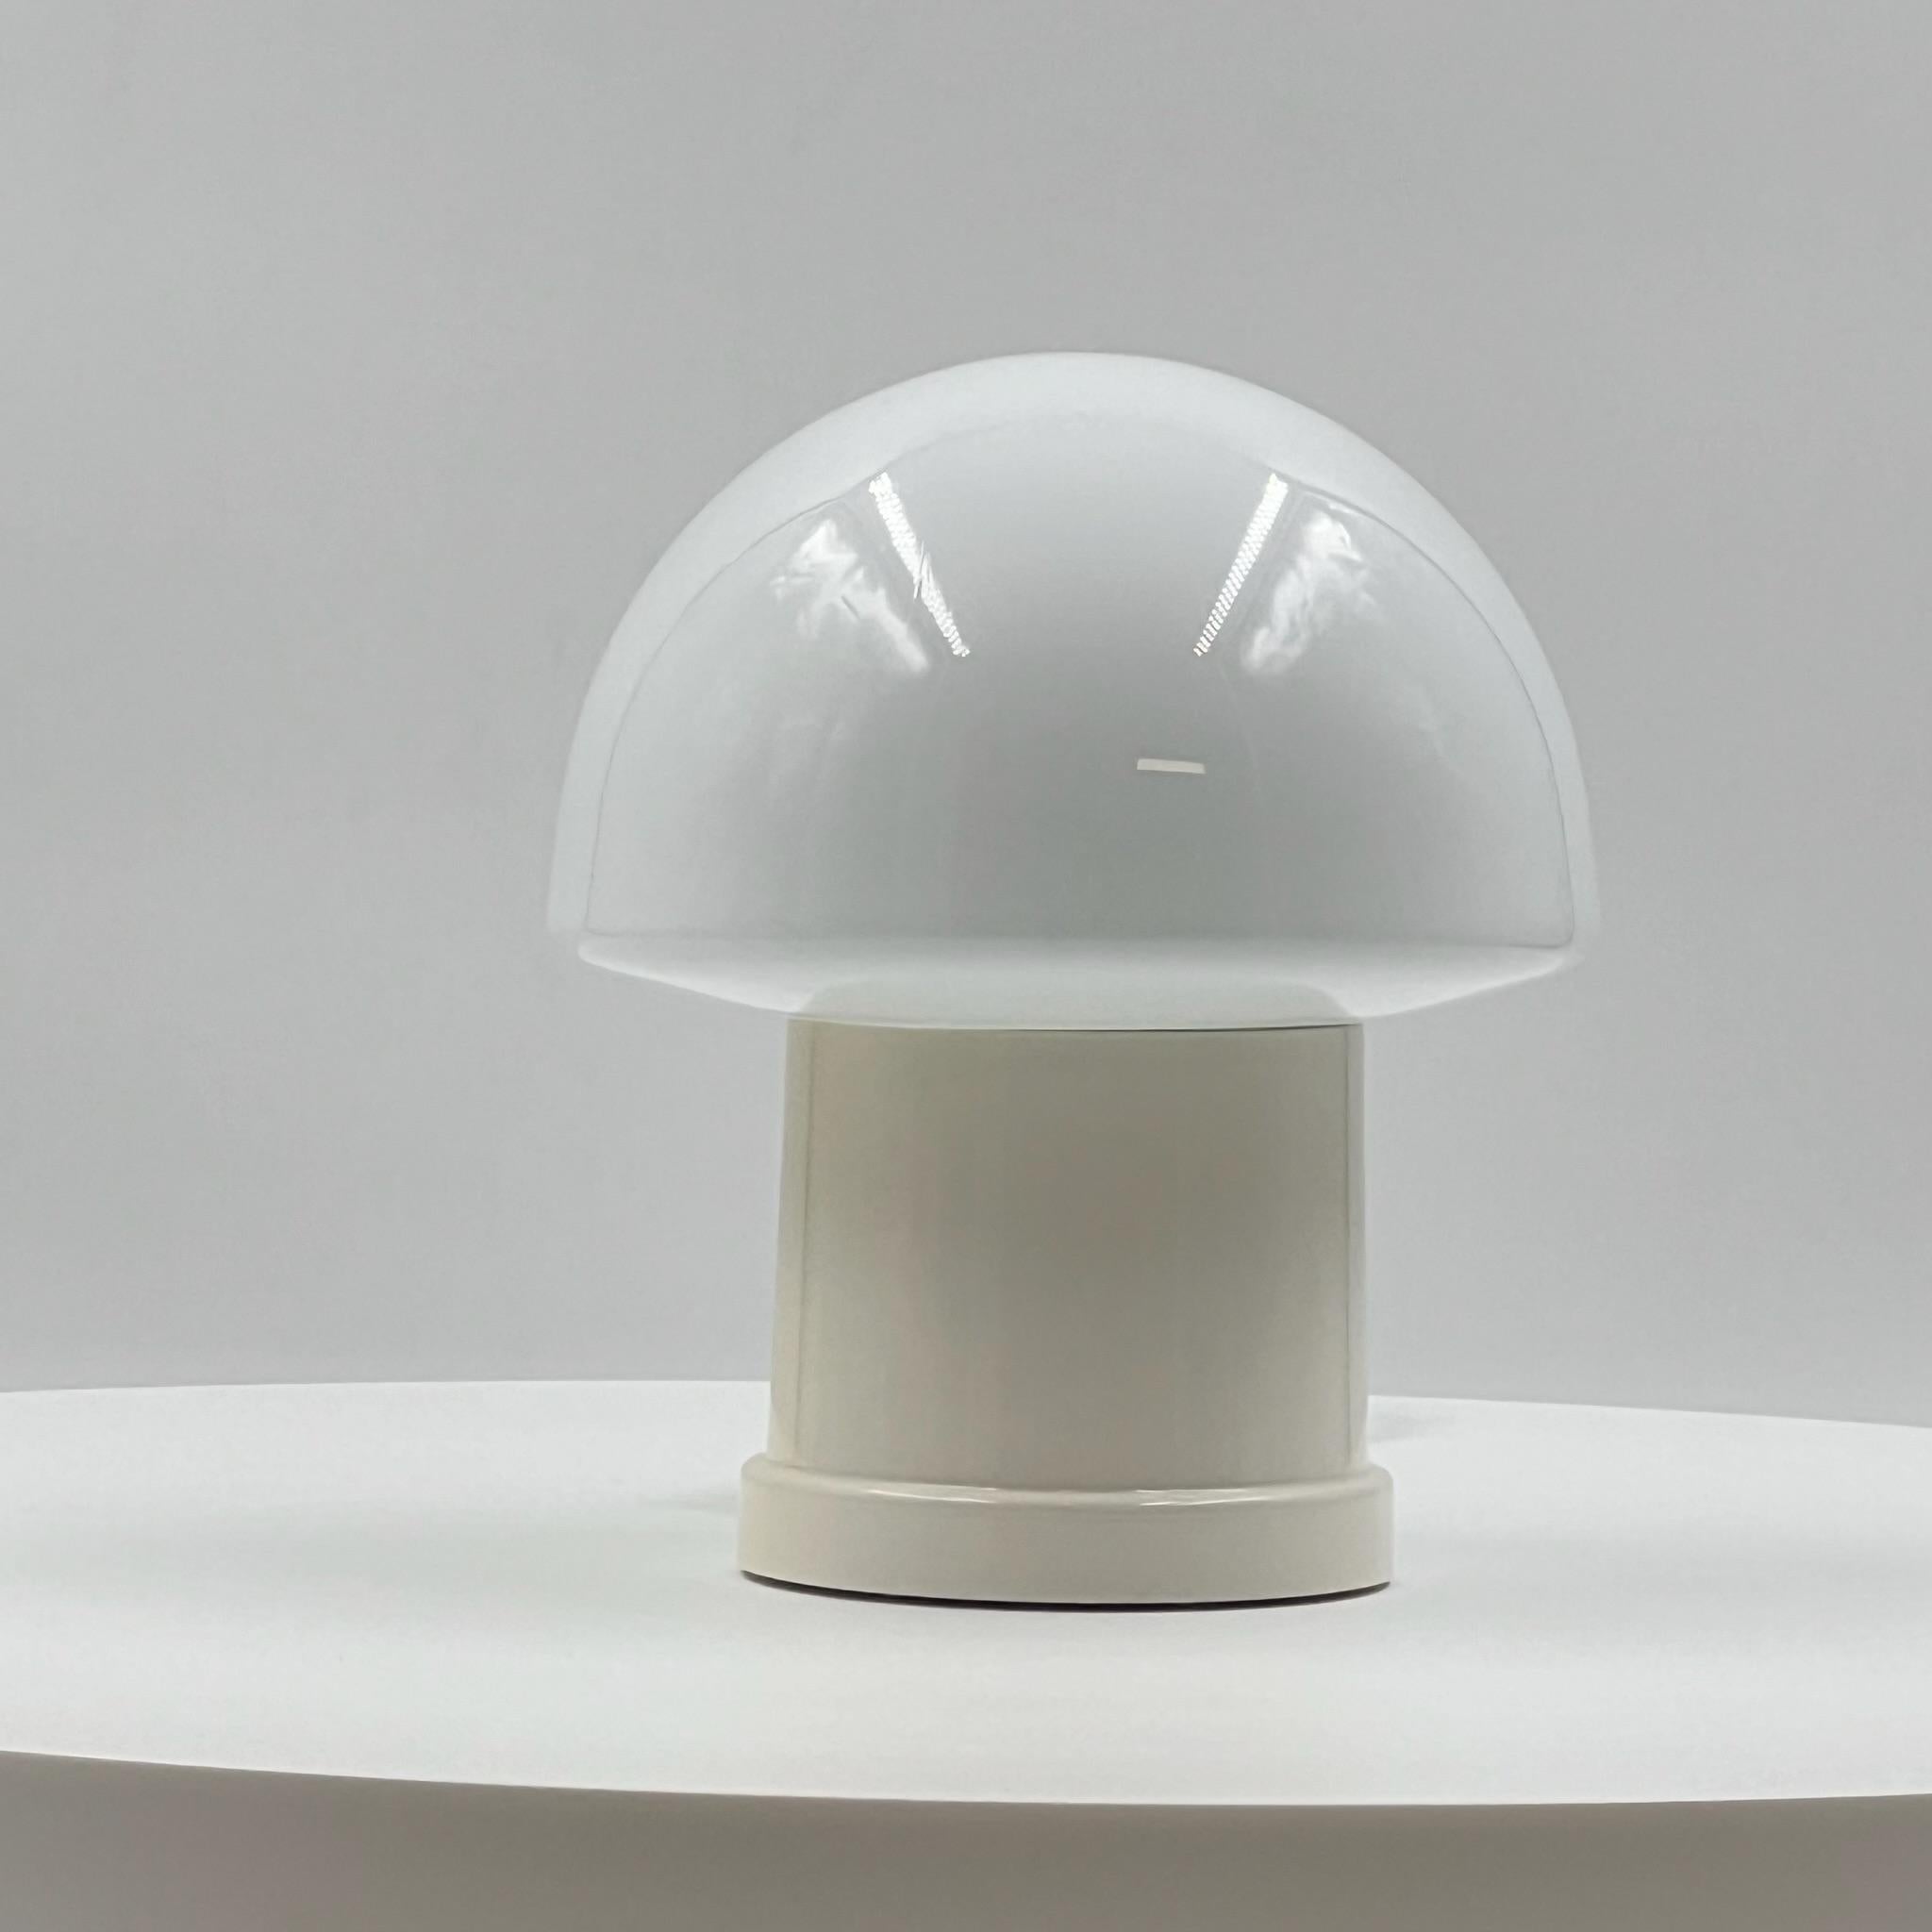 Belgian 70s Space Age Mushroom Lamp - Iconic Design Charm by Massive Belgium For Sale